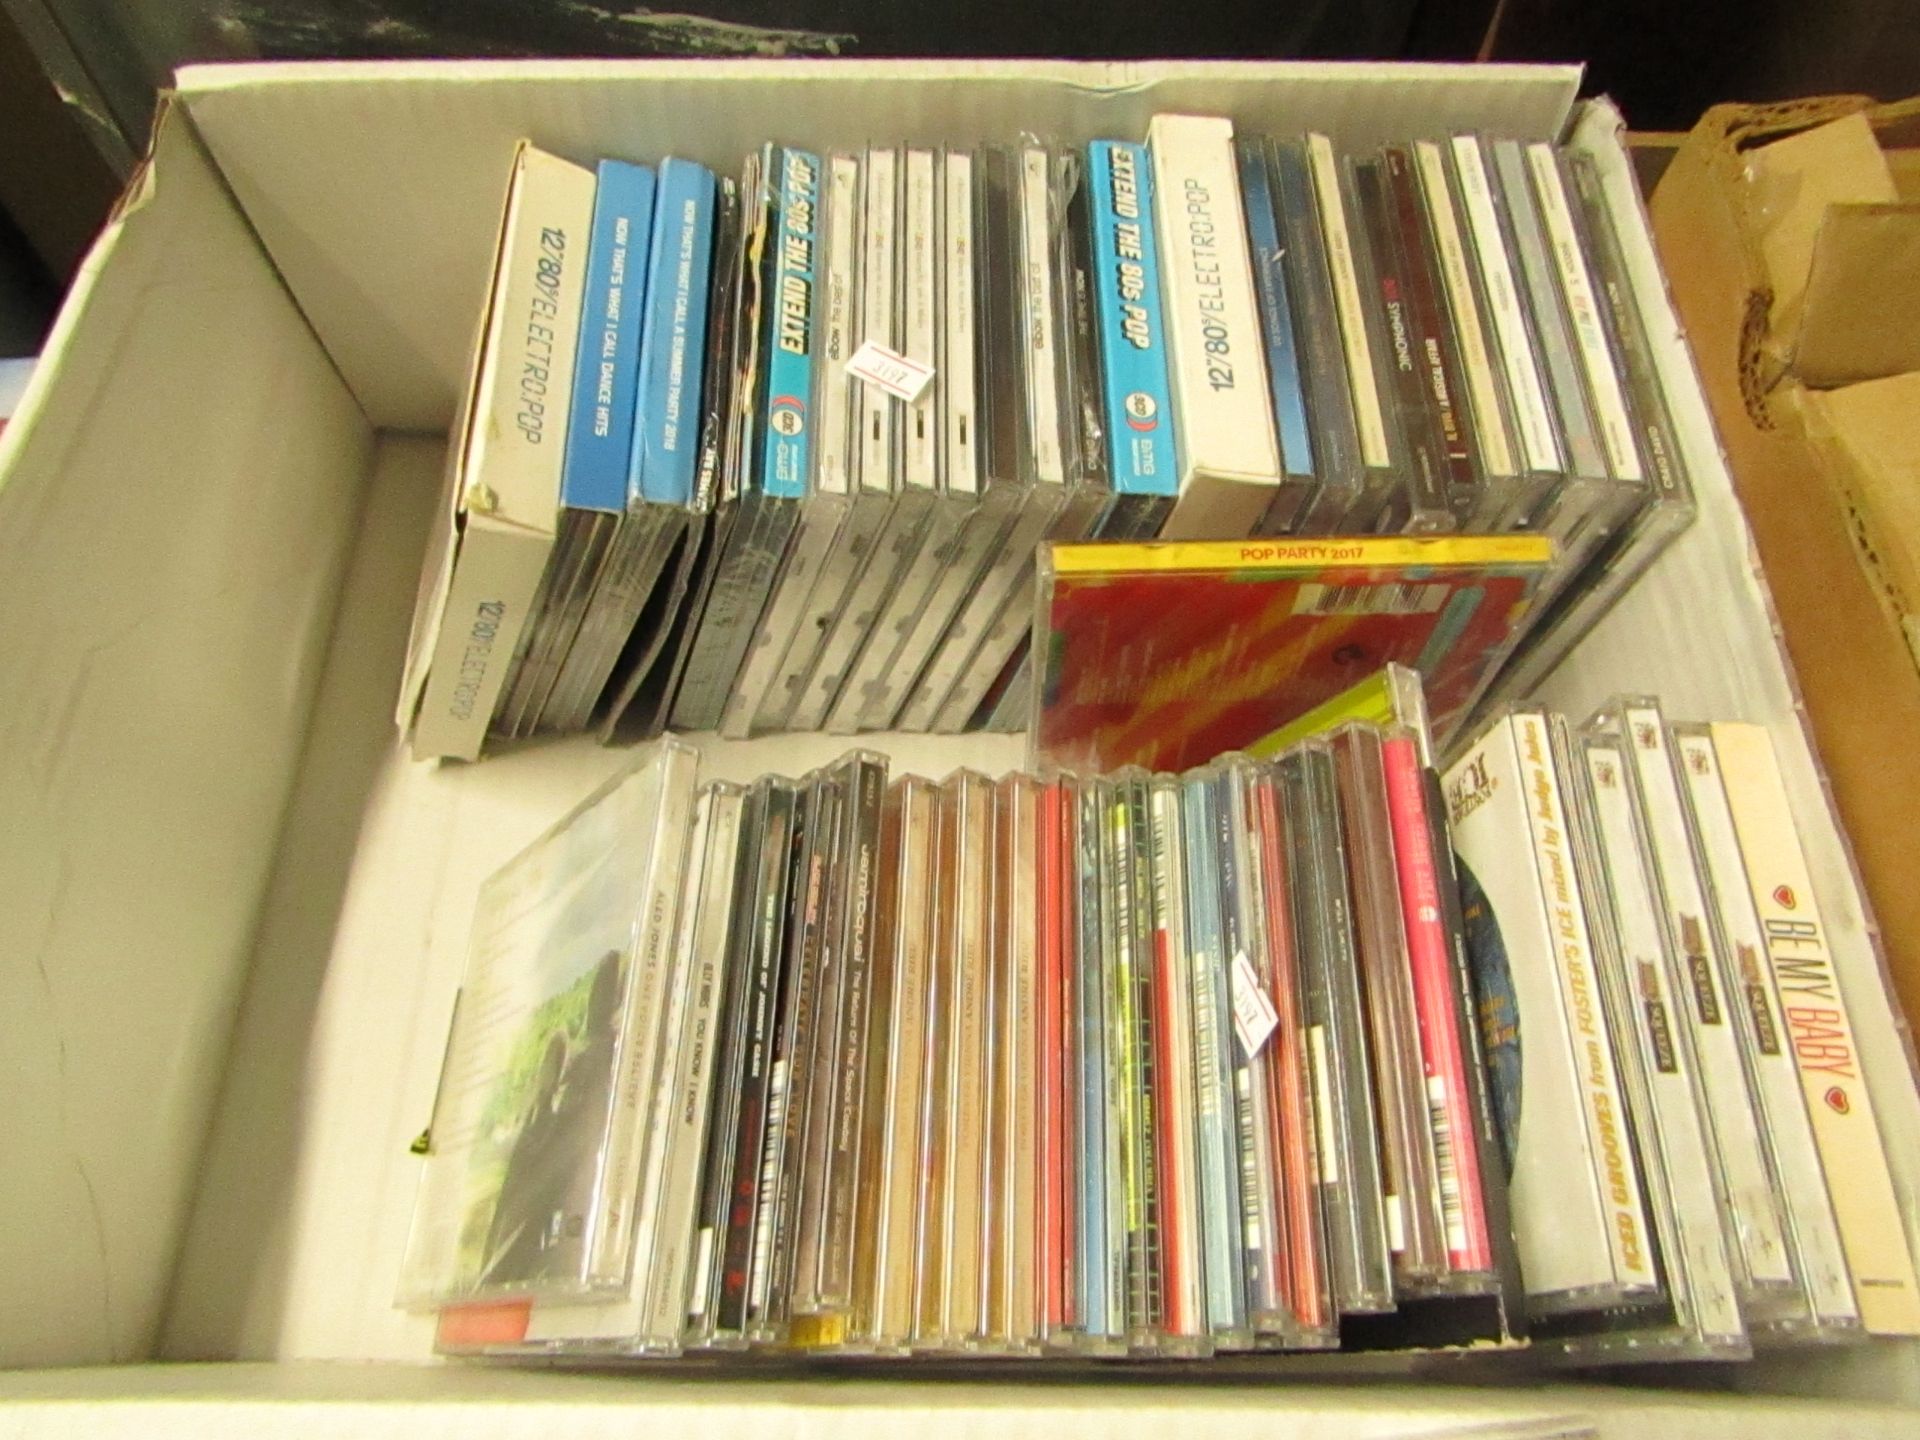 Box Containing Approx 50+ Various Assorted CD's - Used Condition.